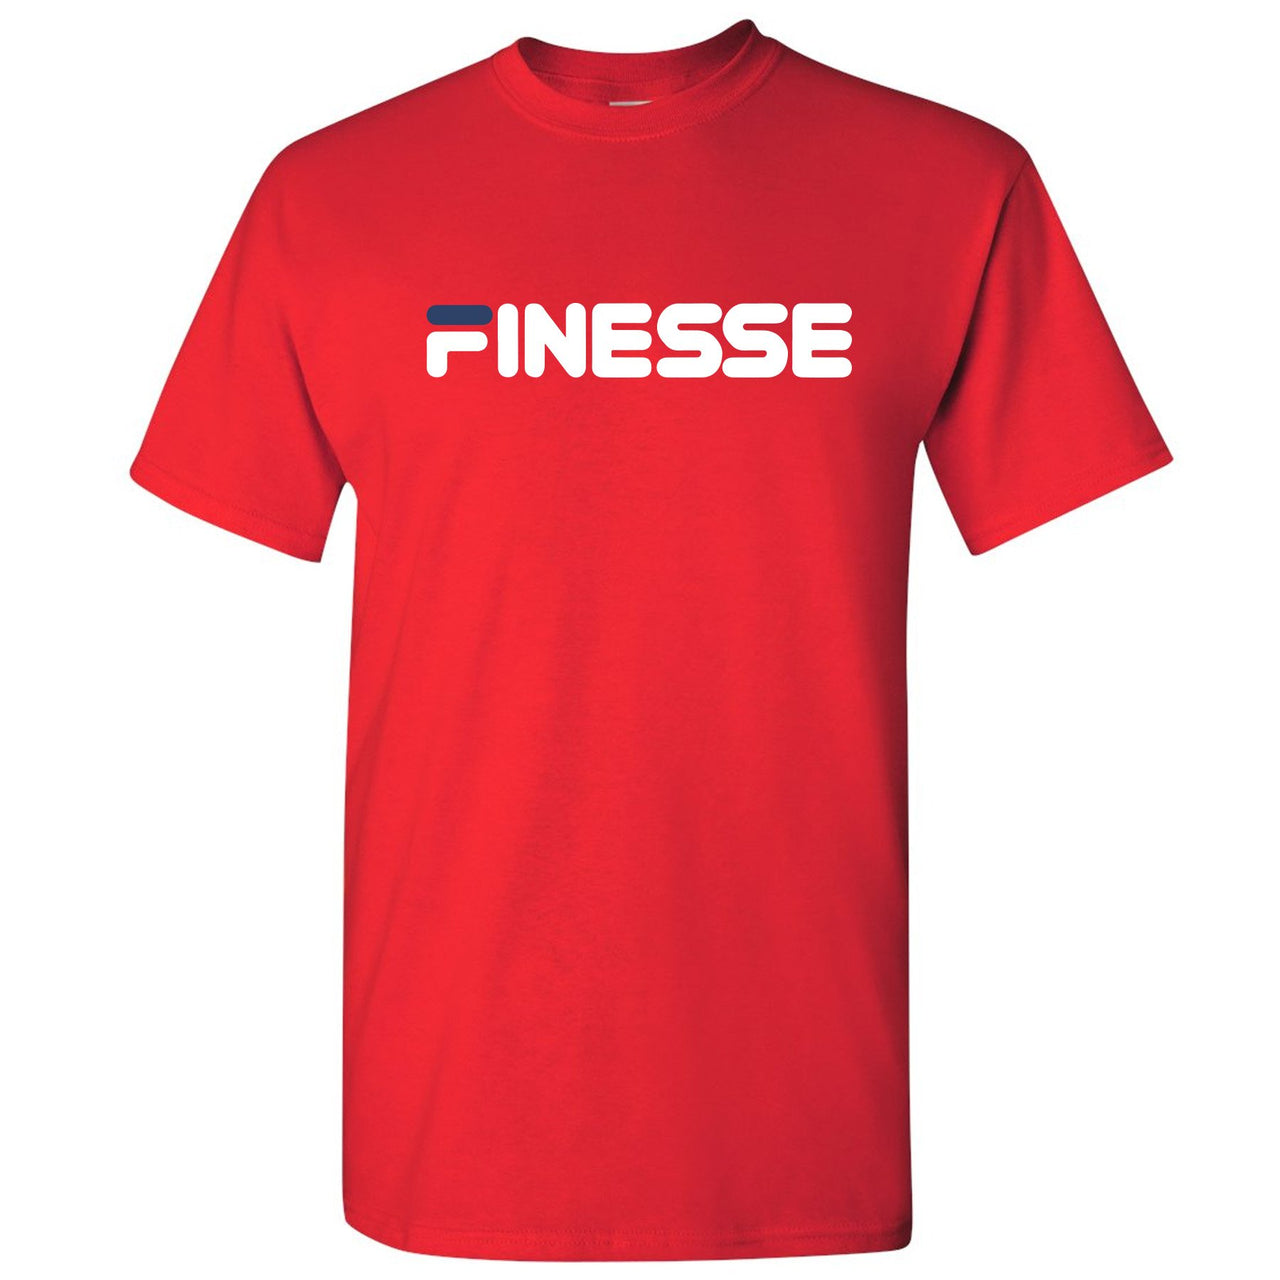 USA One Foams T Shirt | Finesse, Red